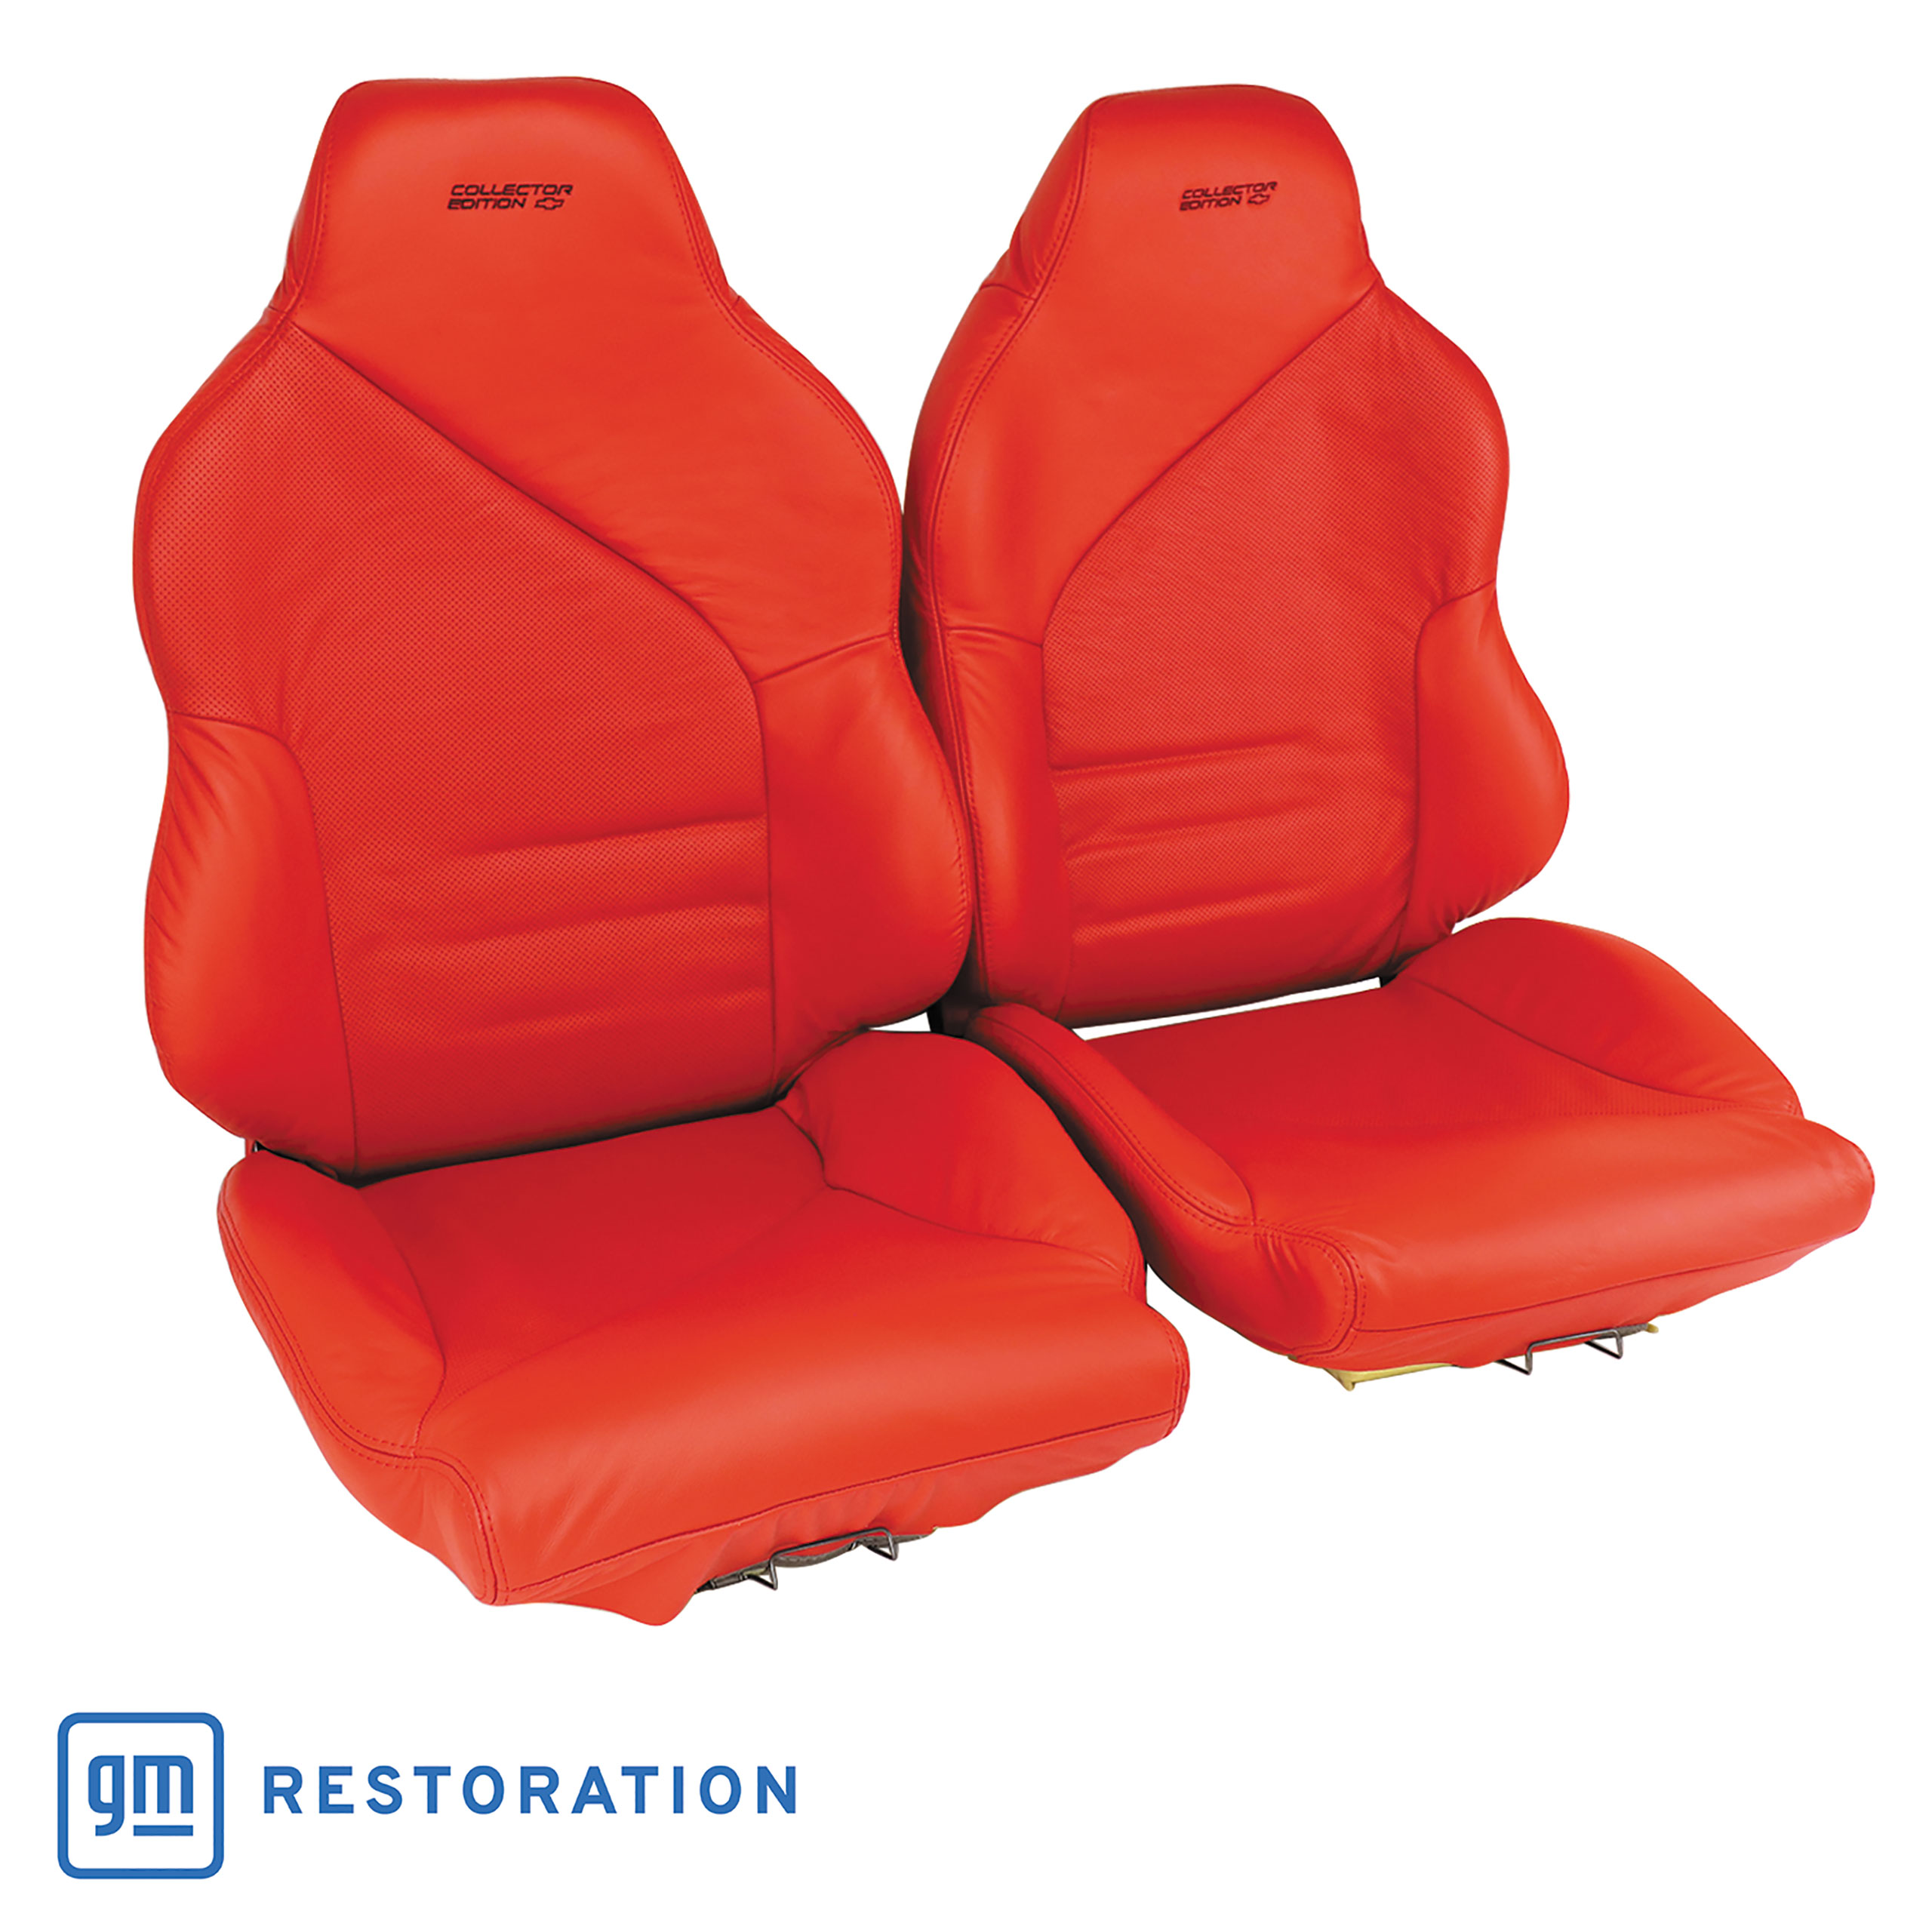 1996 C4 Corvette Leather Seat Covers Red Collector Edition 100%-Leather W/Foam